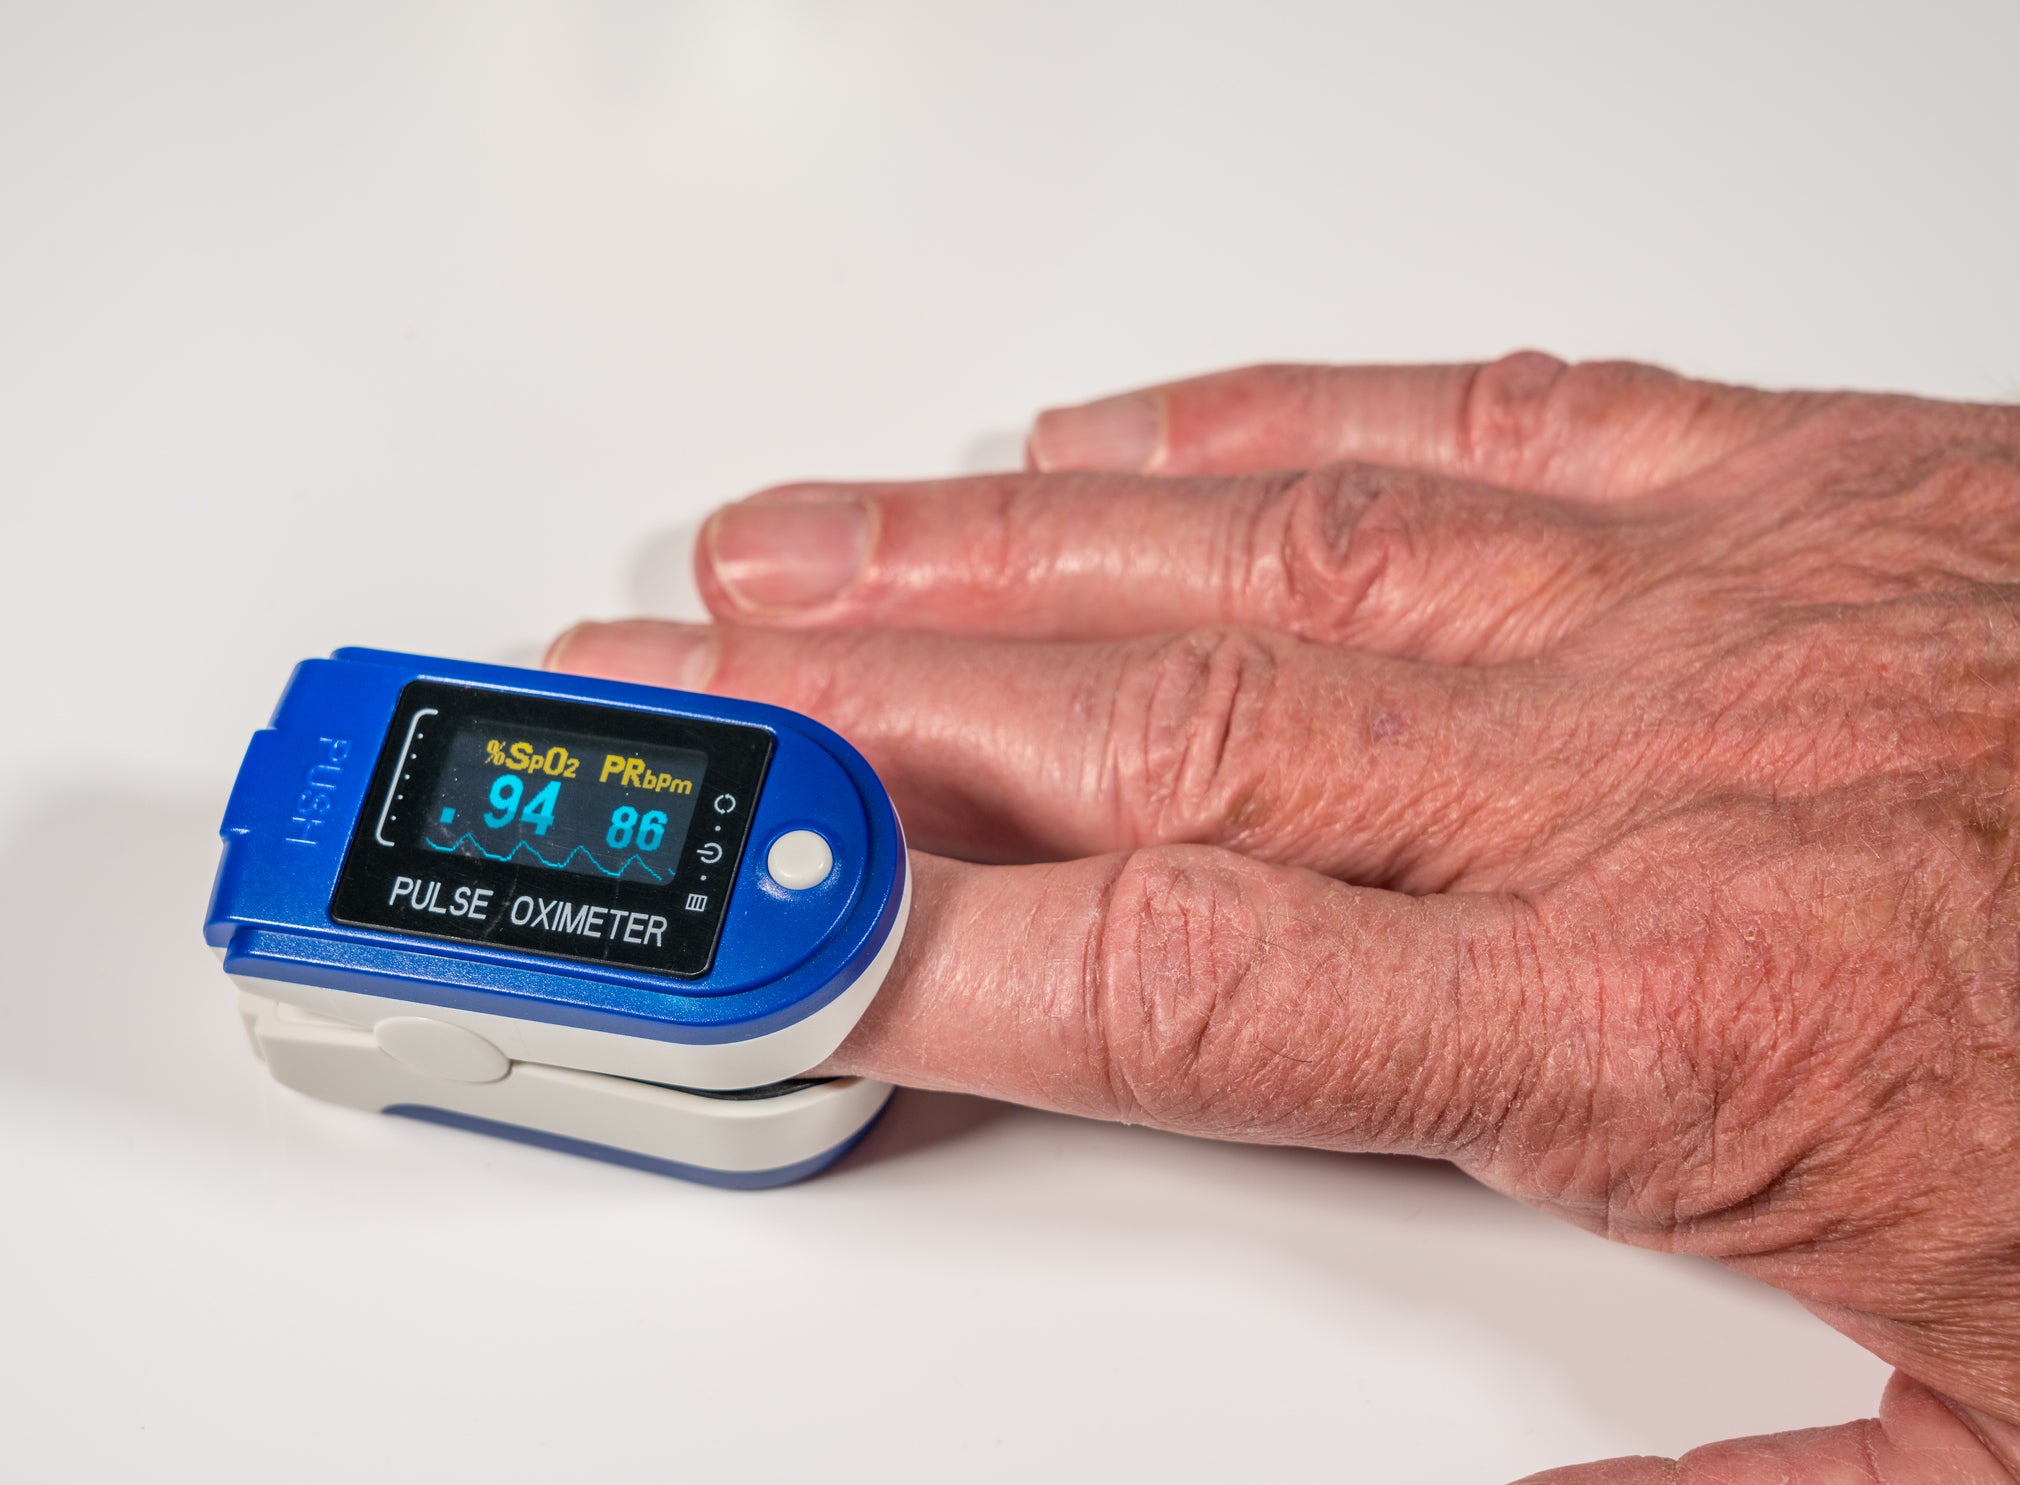 Oximeters are used on people with Covid-19 to make sure their oxygen levels do not drop to dangerous lows